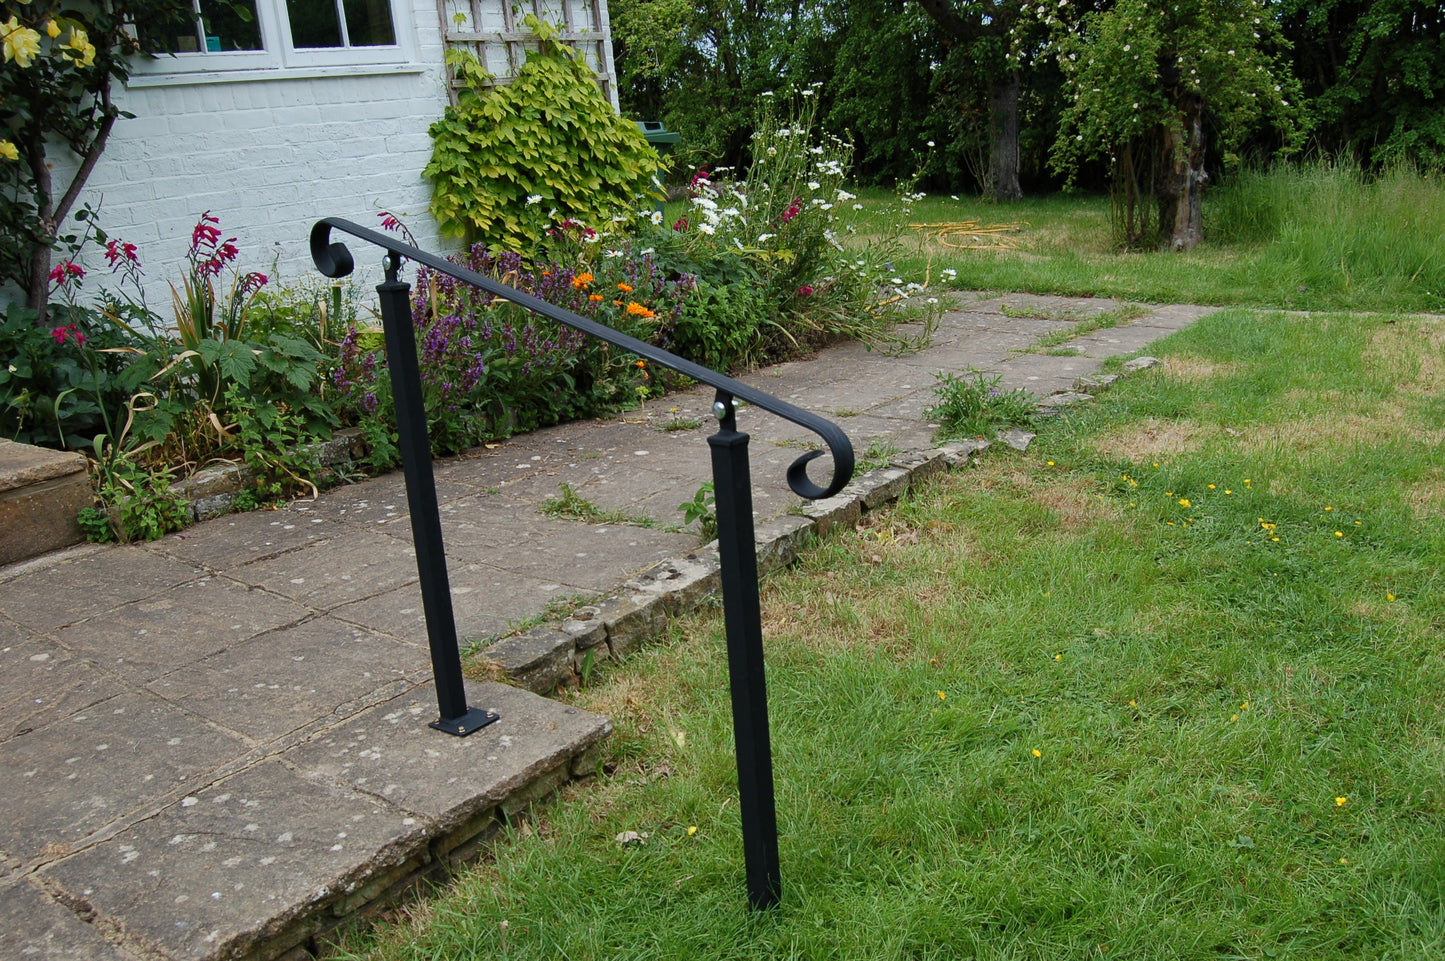 Wrought Iron Style Handrail on Two Pivoting Bolt Down Posts - Amon - 1m - 2.4m